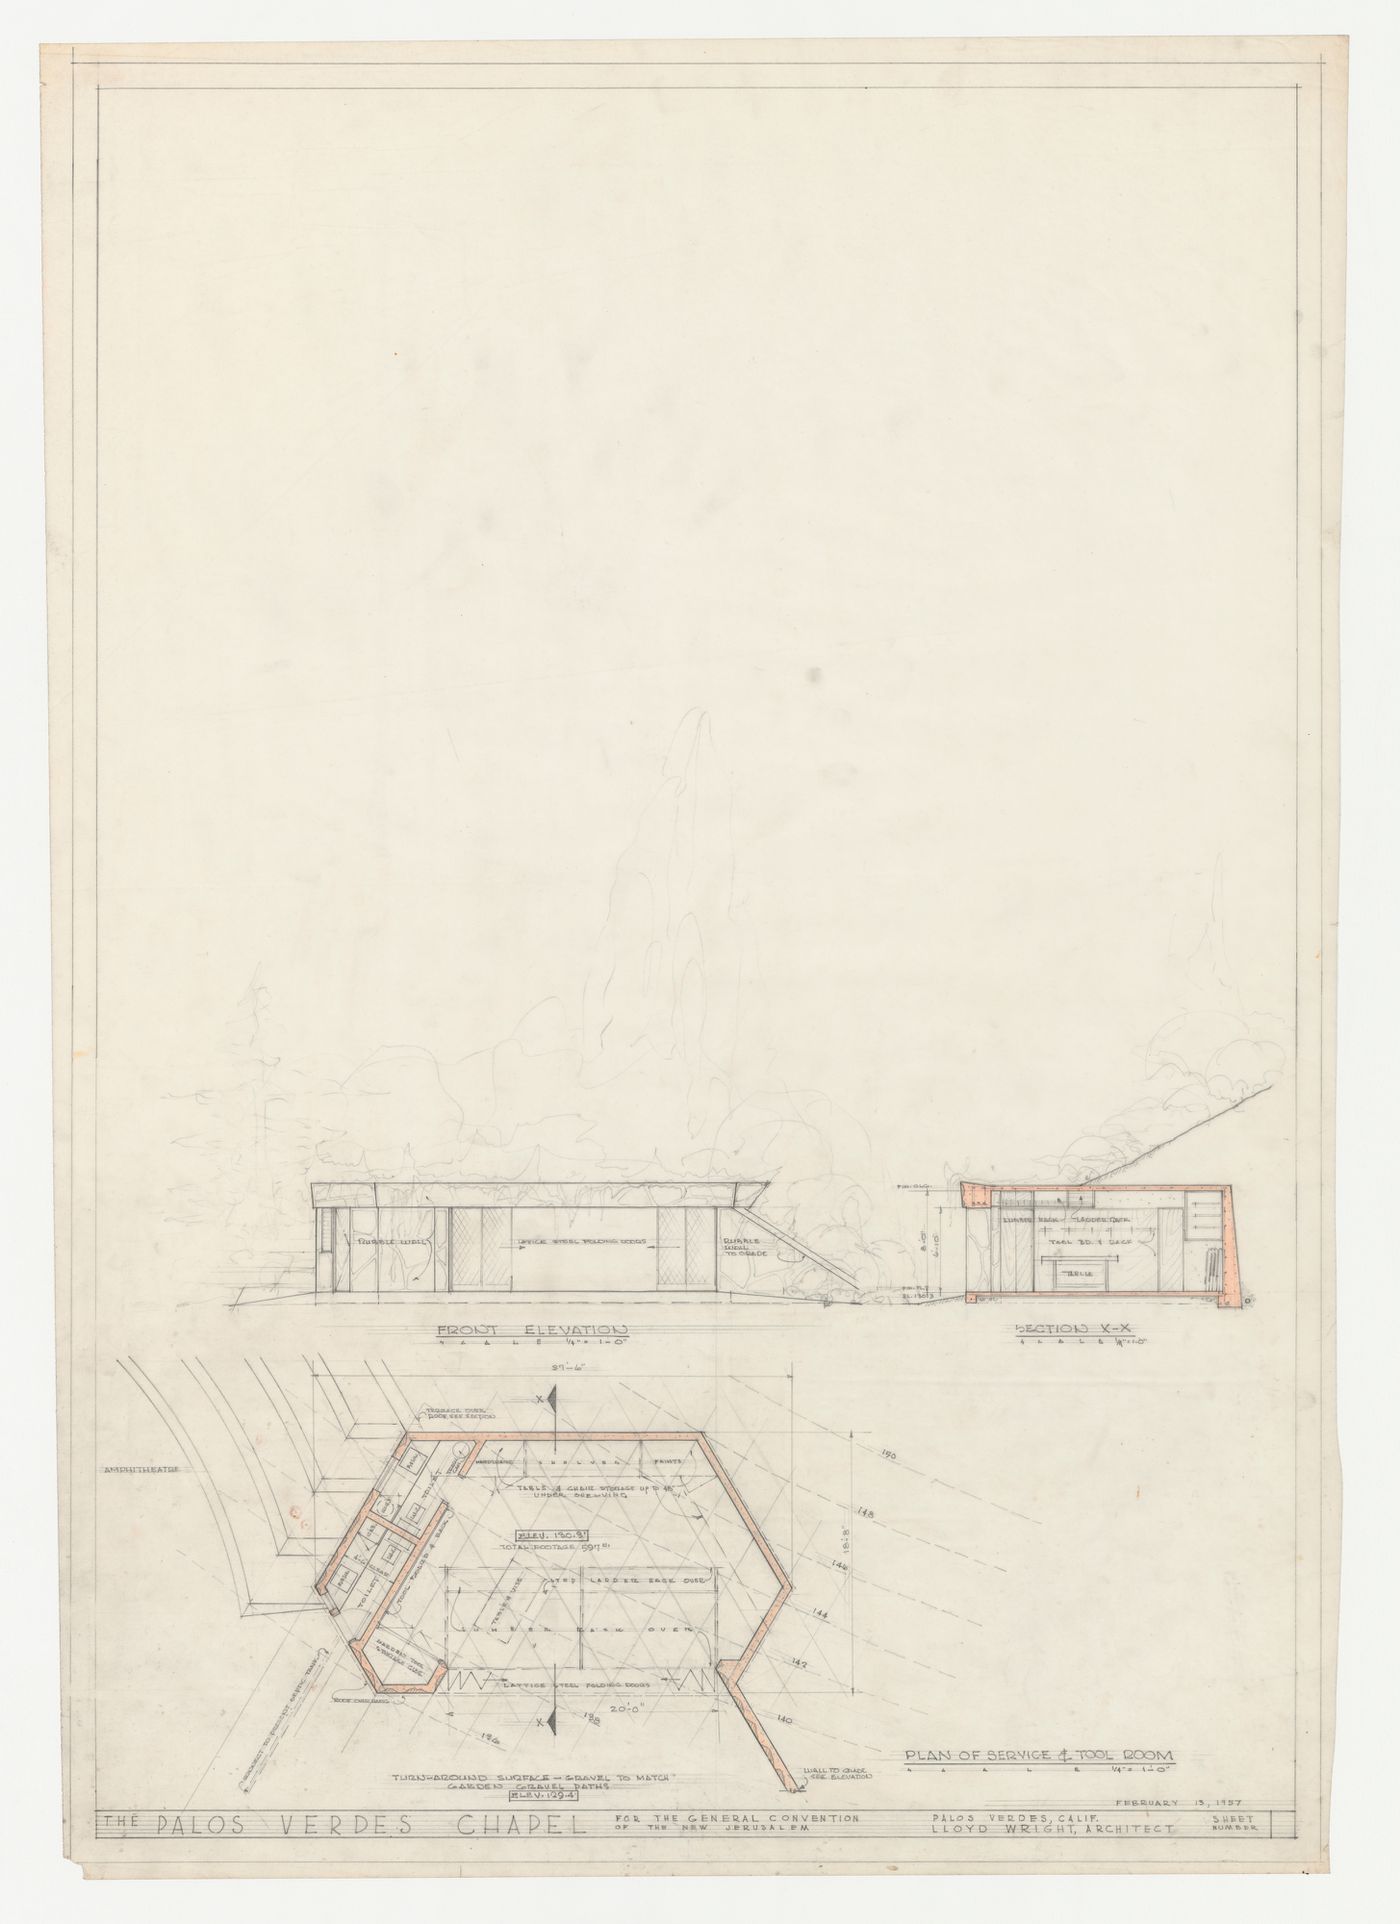 Wayfarers' Chapel, Palos Verdes, California: Front elevation, section and plan for the service and tool room